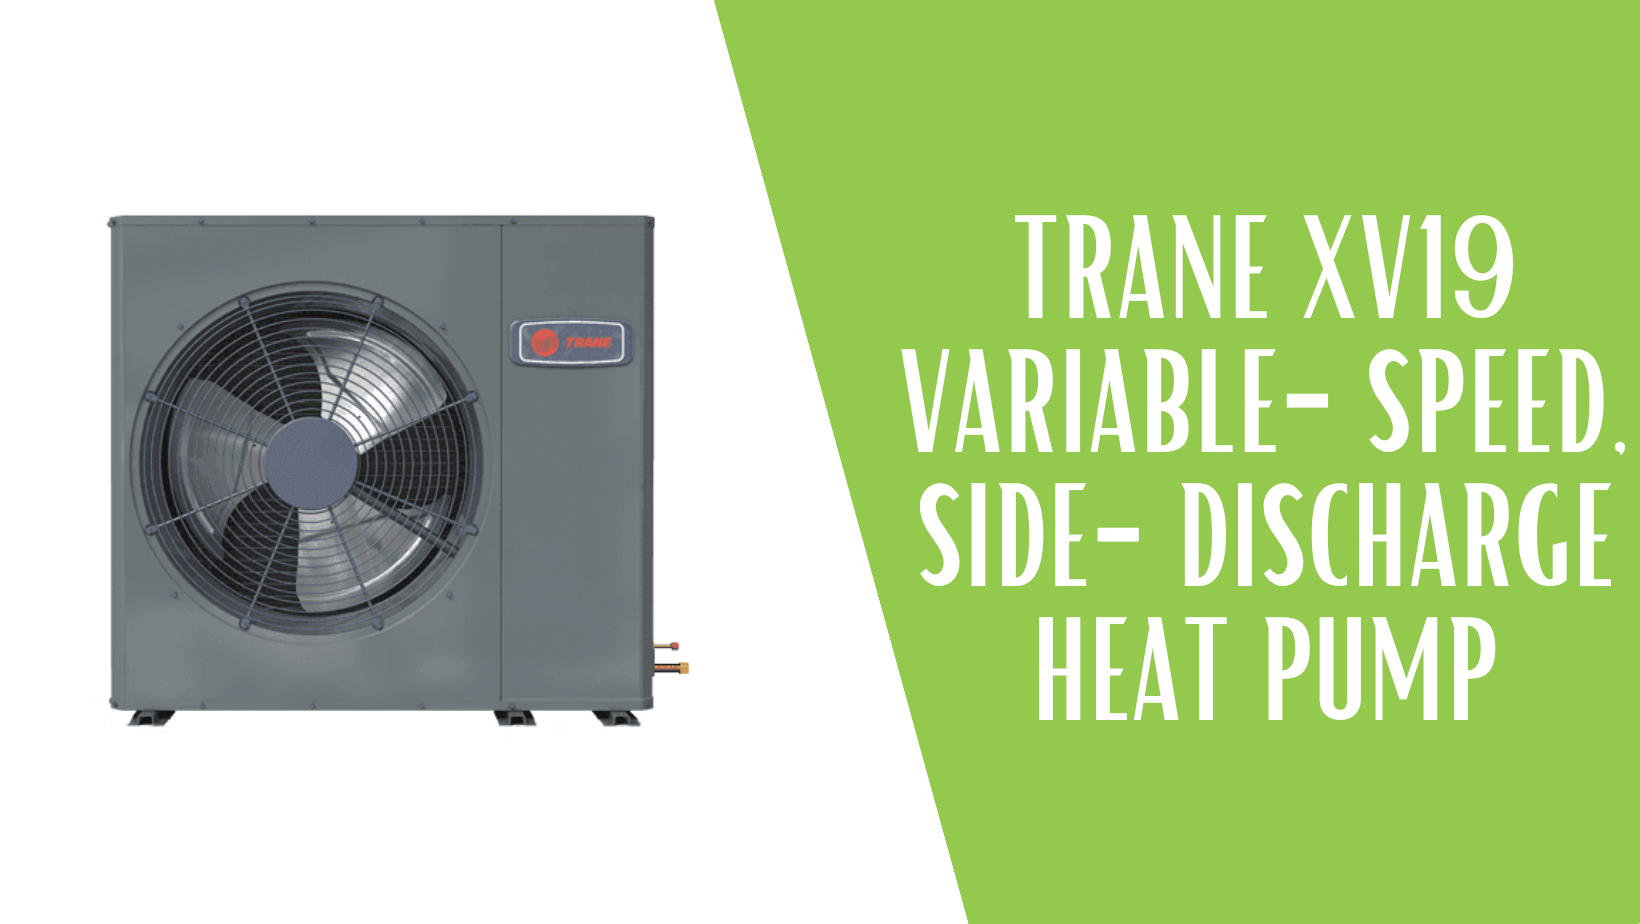 Trane Xv19 variable-speed, low-profile, side-discharge heat pump